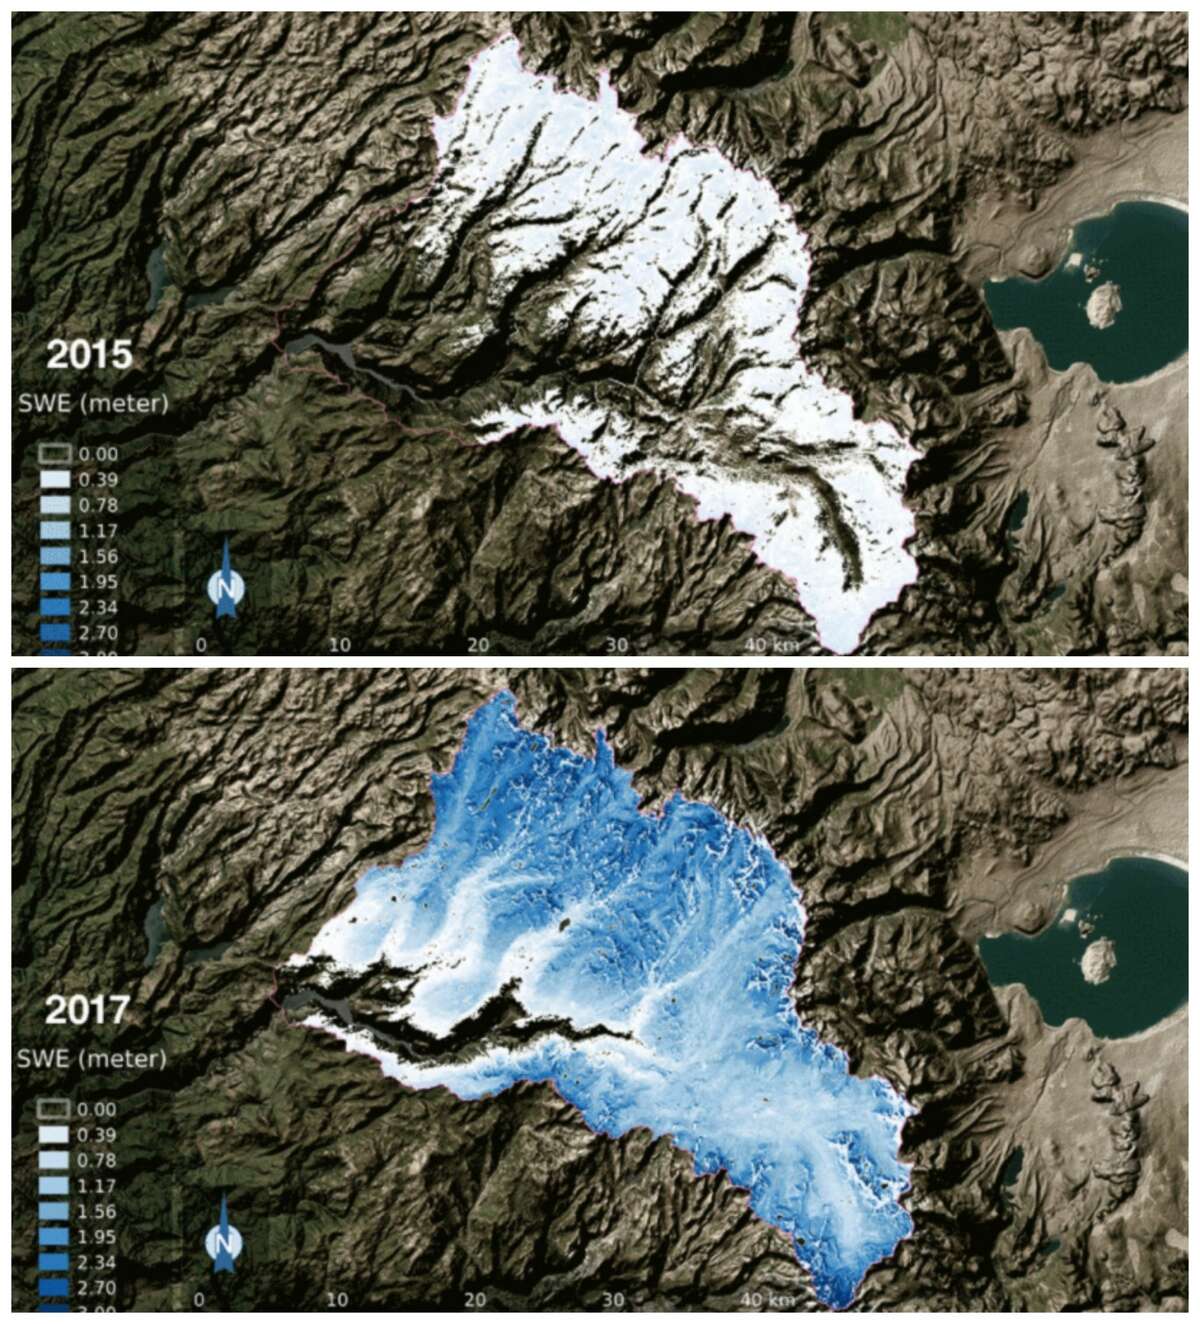 This photo composite shows the snow water equivalent-- water content of snow -- in the Tuolumne River Basin in 2015 and 2017. White and the lighter blue indicates less snow, while deeper blue represents more snow. NASA reports: "The 2017 snow water equivalent was 21 times greater than 2015, which was the lowest snowpack on record."